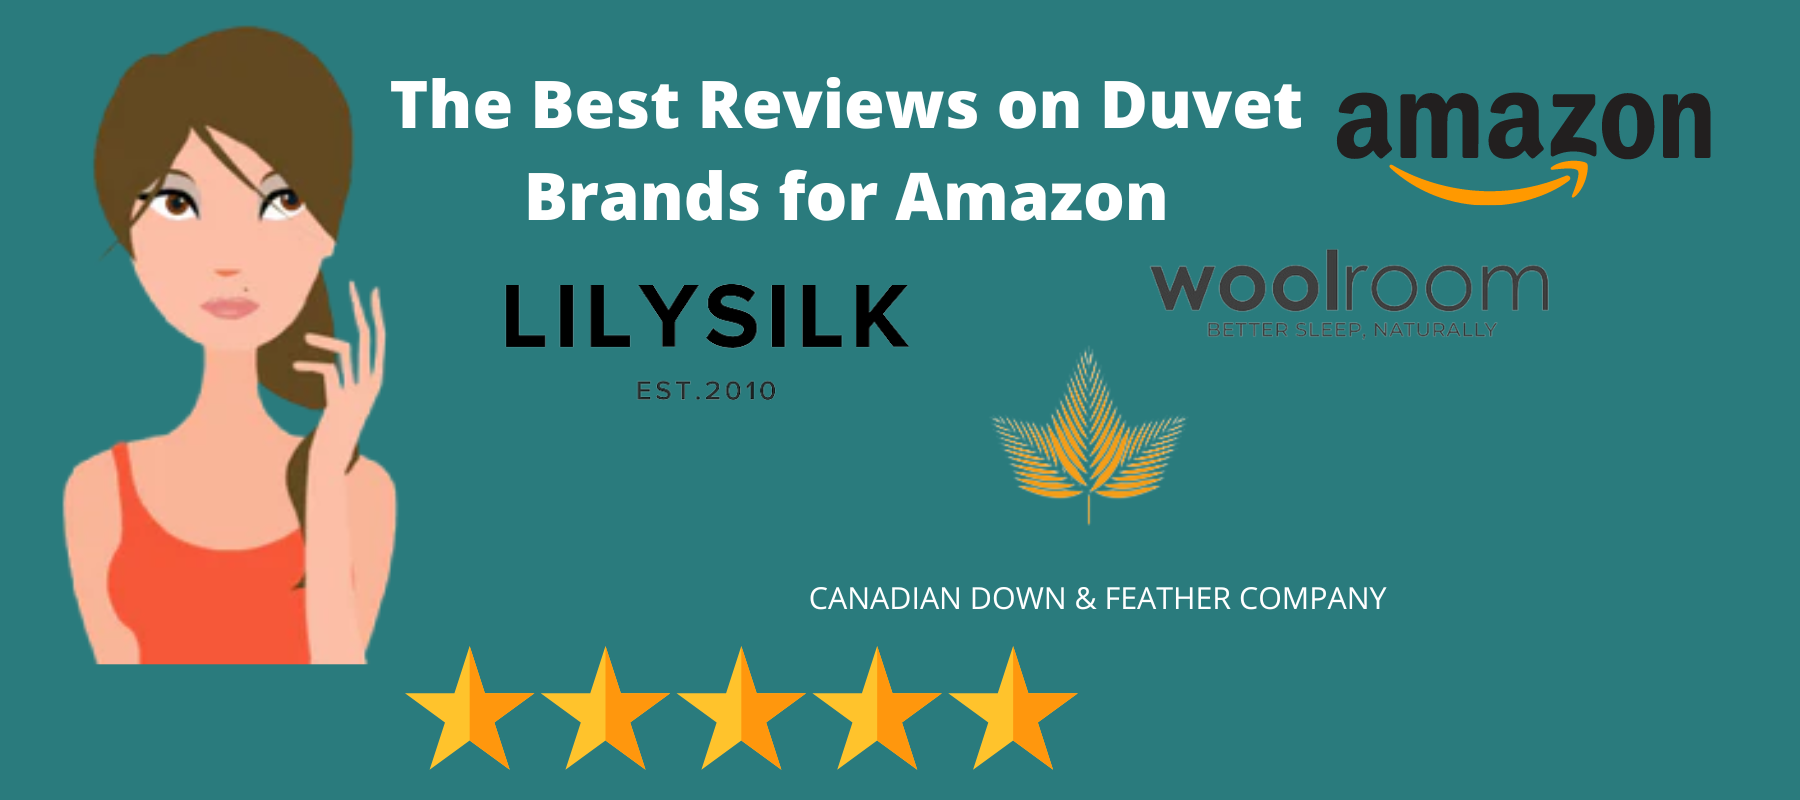 The Best Reviews on Duvet Brands for Amazon